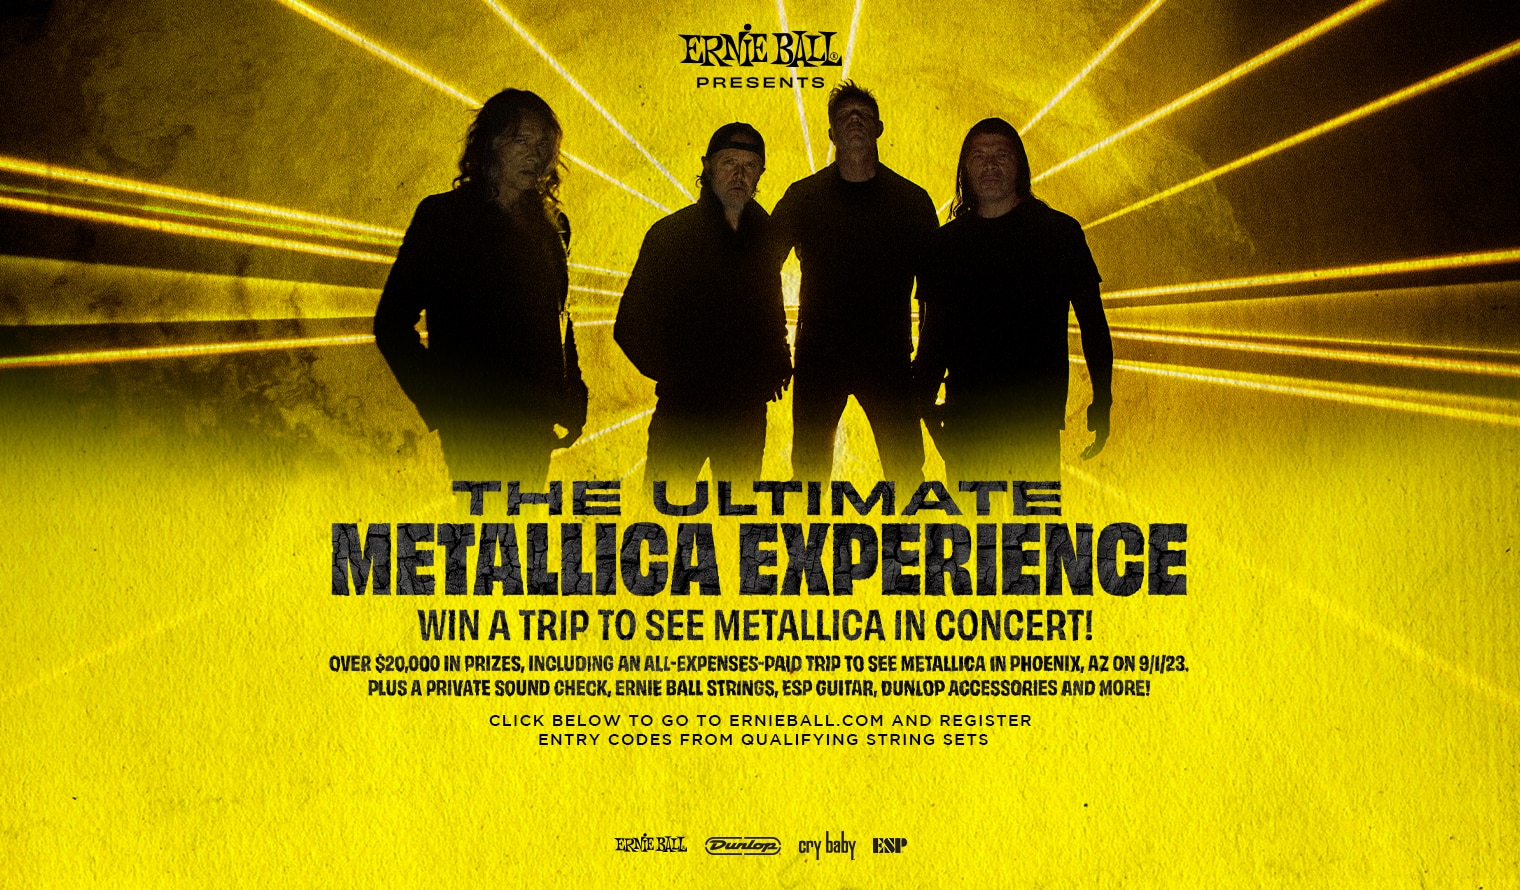 The Ultimate Metallica Experience. Win a trip to see Metallica in concert!